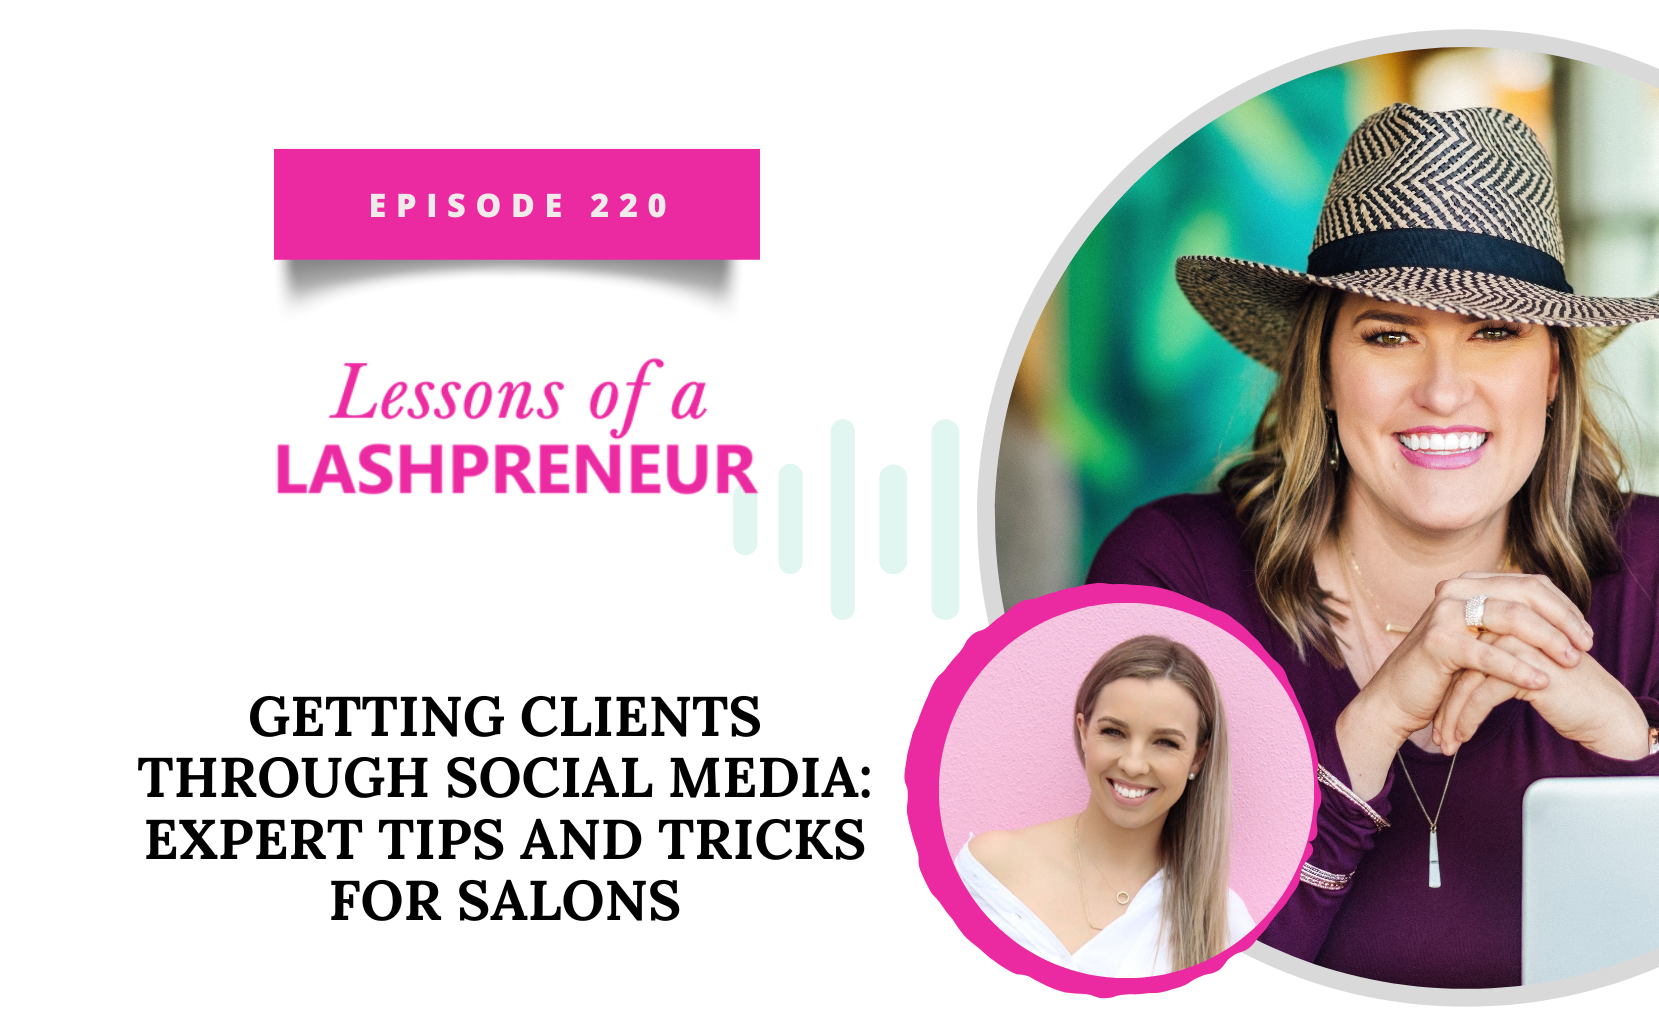 Getting Clients Through Social Media: Expert Tips and Tricks for Salons